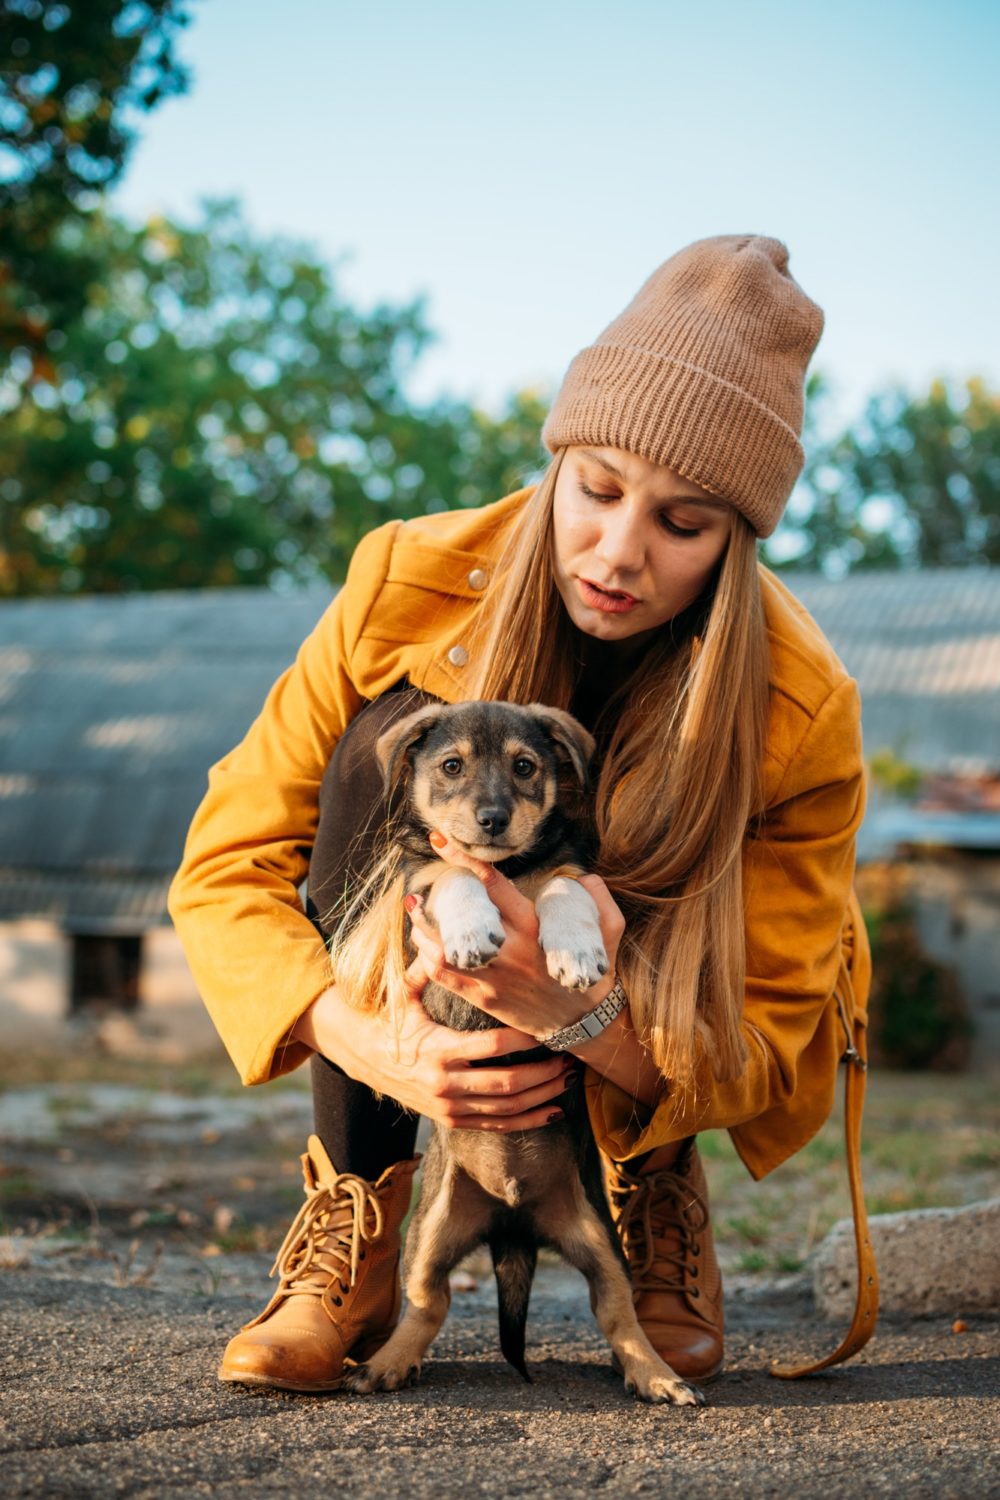 Woman Volunteer meeting homeless dog puppies in fall nature background. Pet love, caring for pets